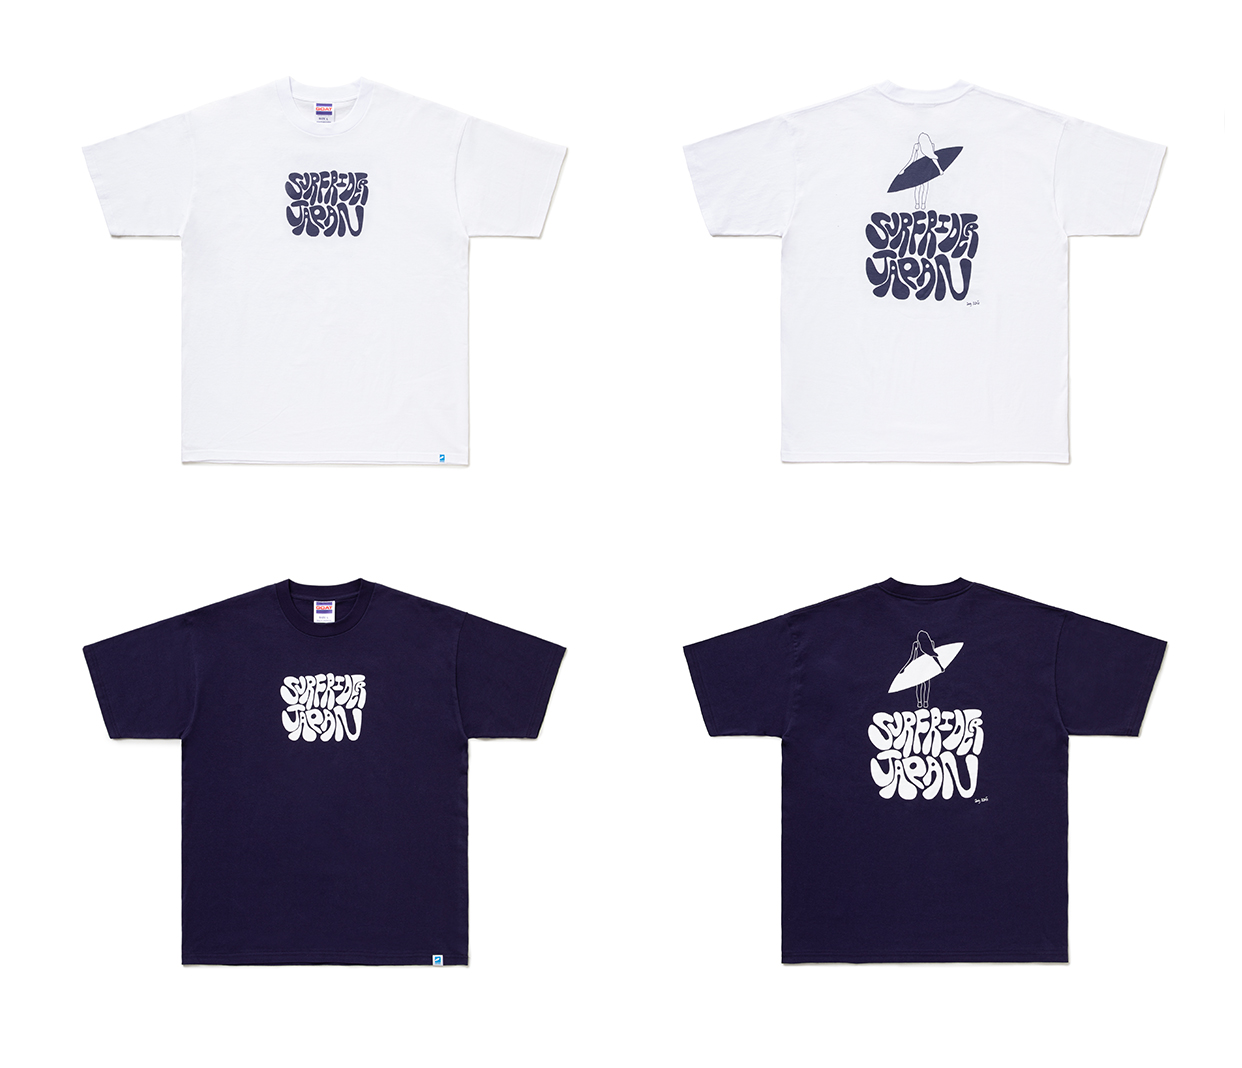 SURFRIDER x GOAT (ANDY GRAPHIC T-SHIRTS)